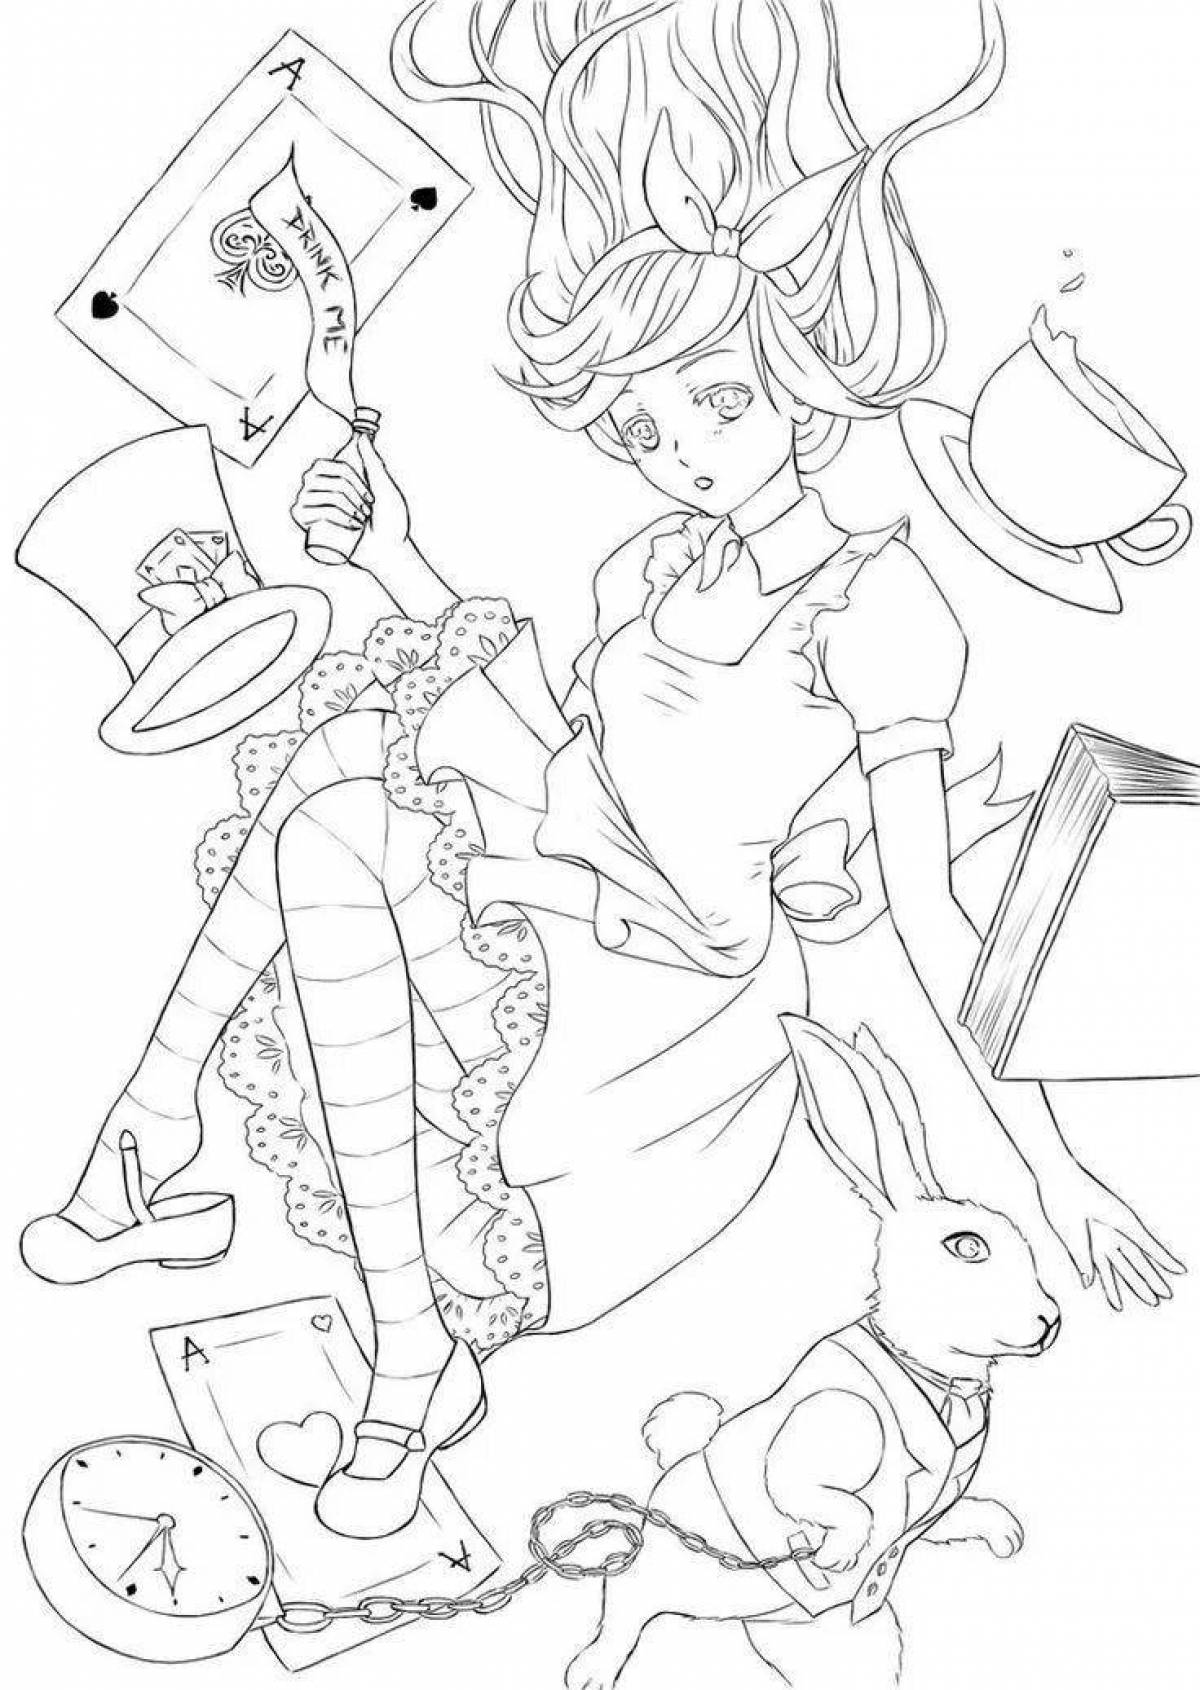 Rampant Alice in Wonderland coloring page